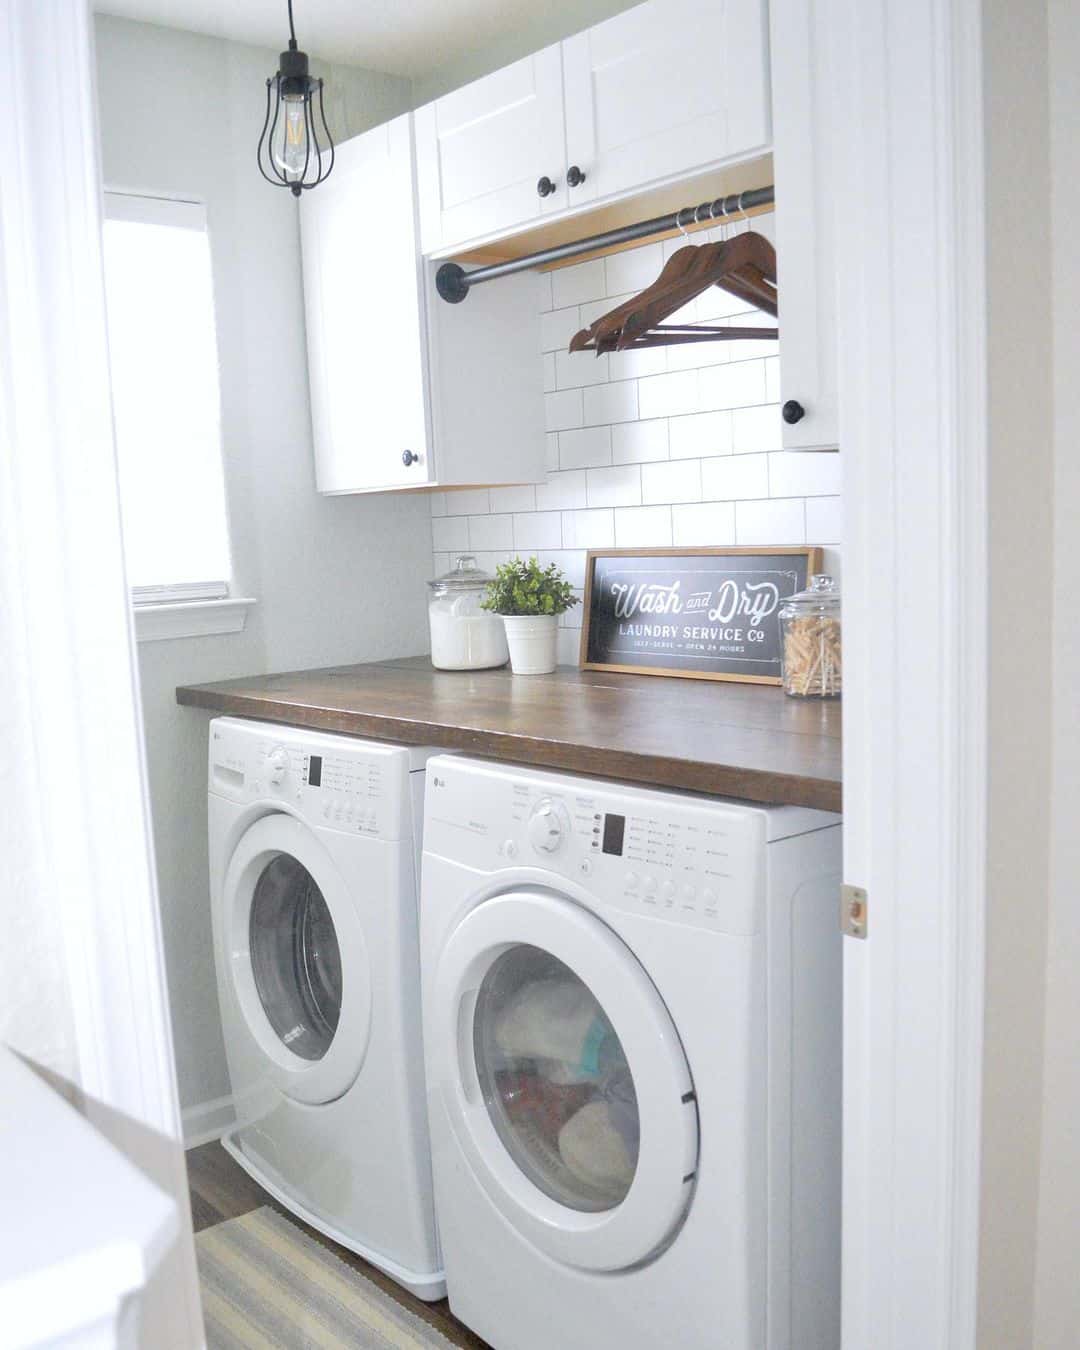 23 Laundry Room Upper Cabinets to Organize Your Washing Area